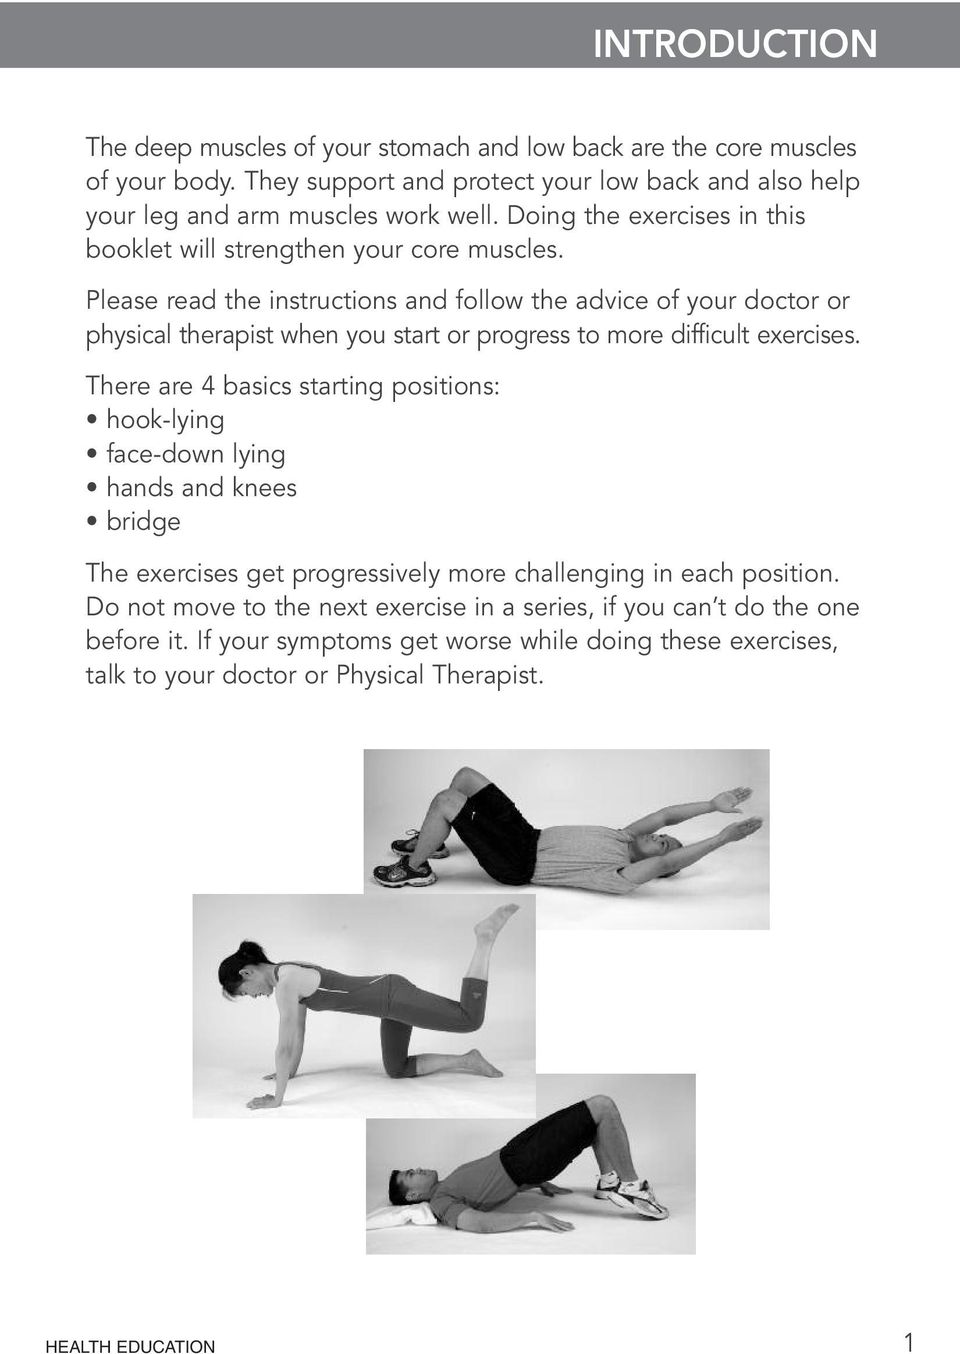 Please read the instructions and follow the advice of your doctor or physical therapist when you start or progress to more difficult exercises.